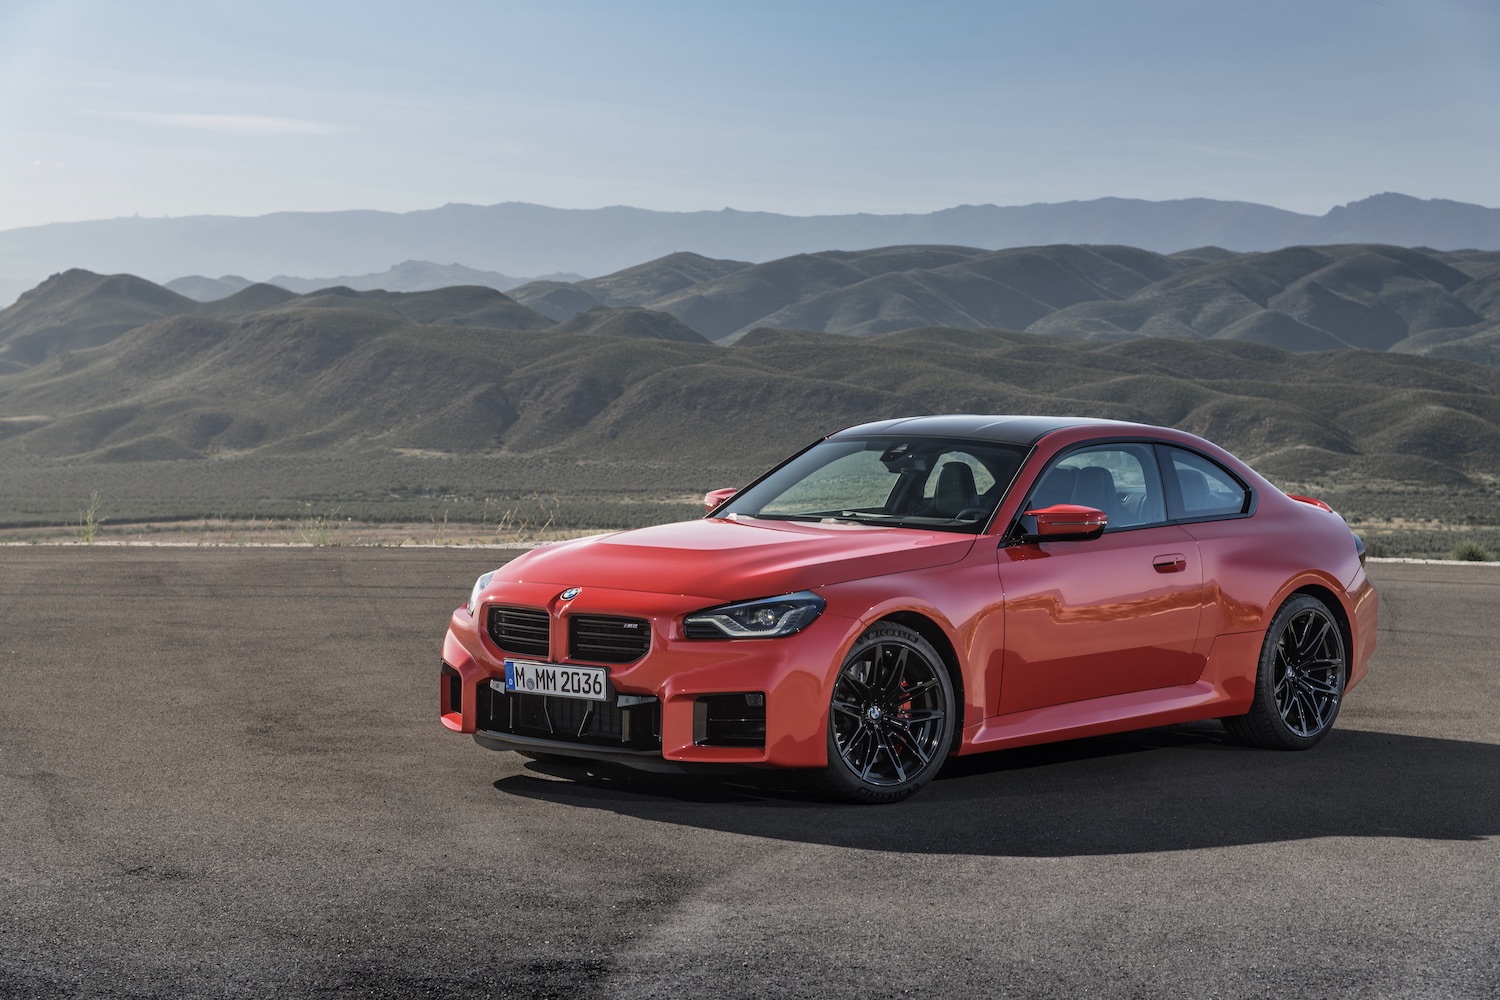 BMW M2 returns with 453 hp and a puppy-scaring mug - The Manual